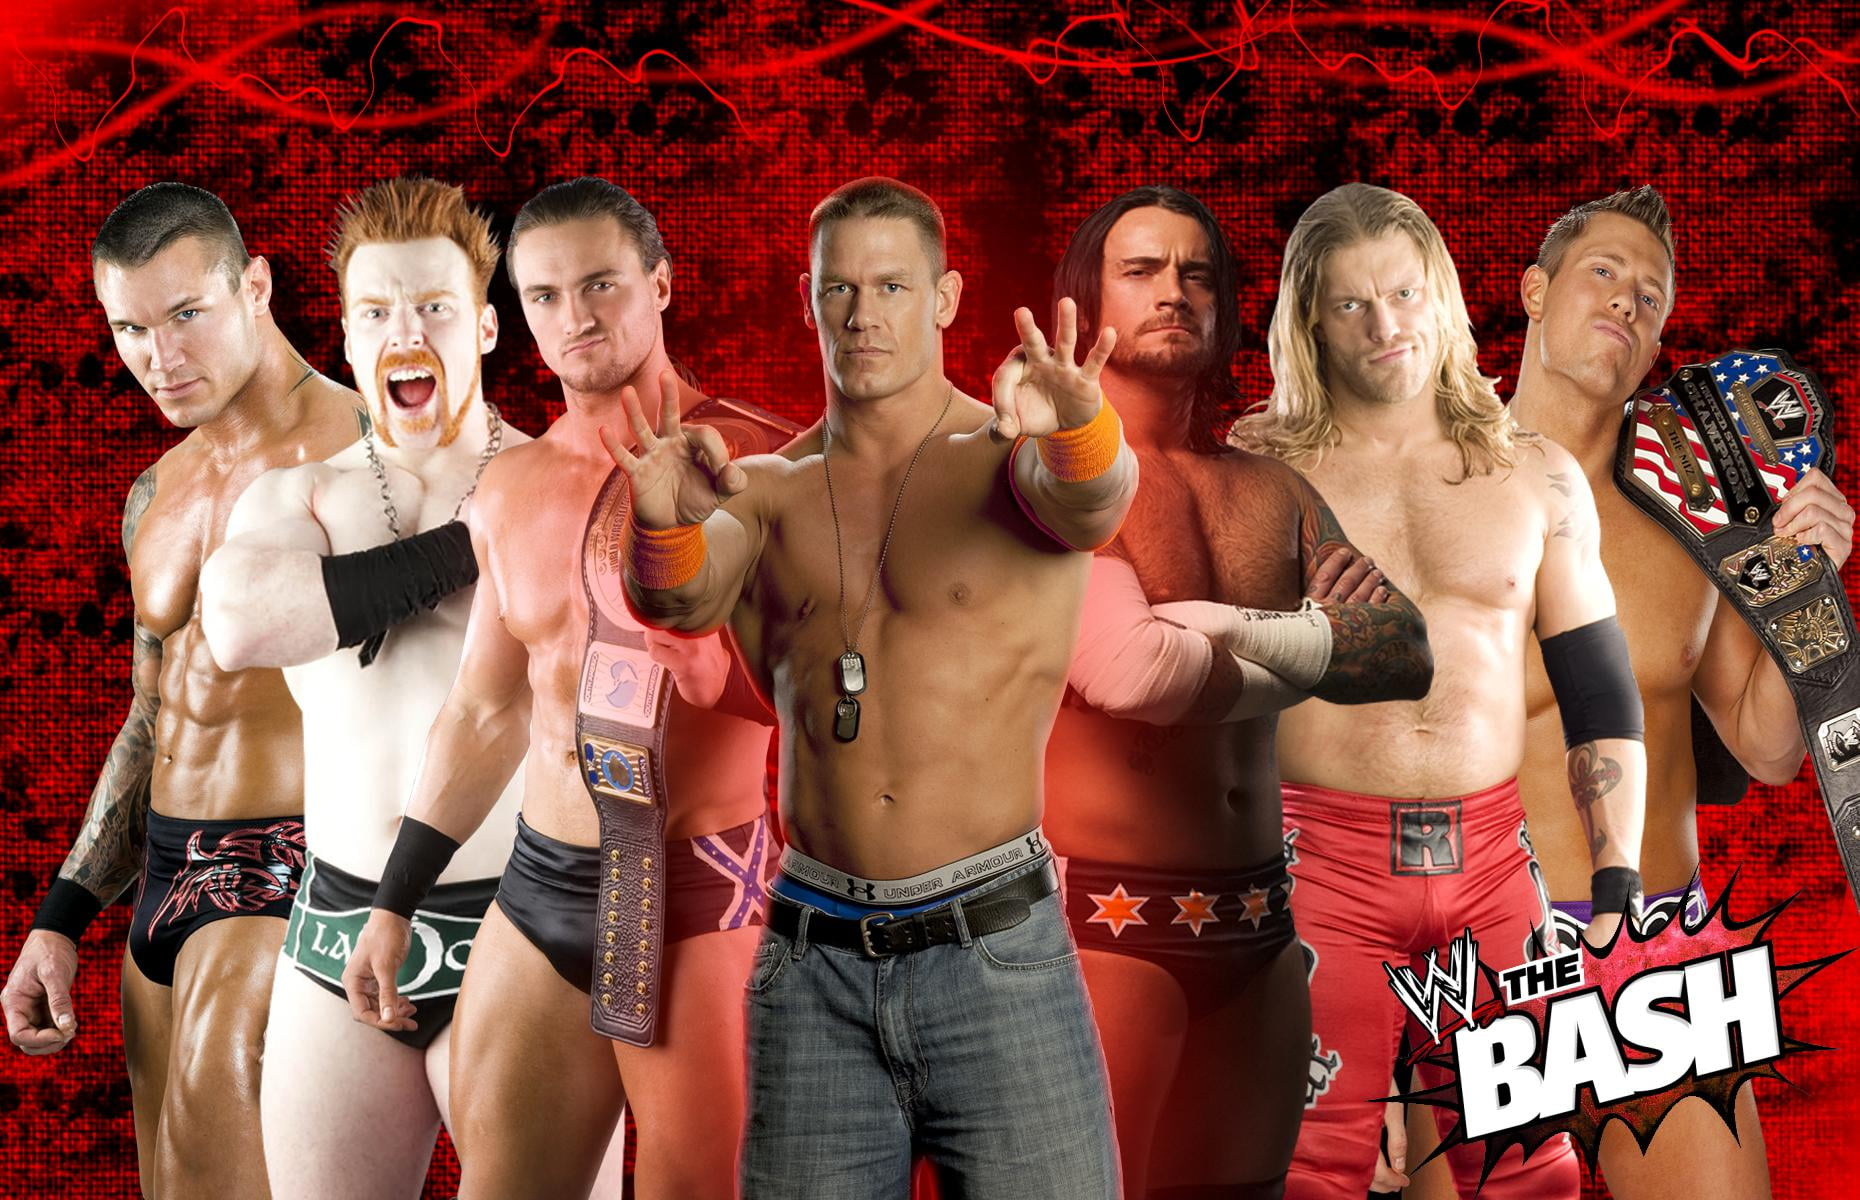 WWE The Bash, WWE superstars, super star, young adult, group of people